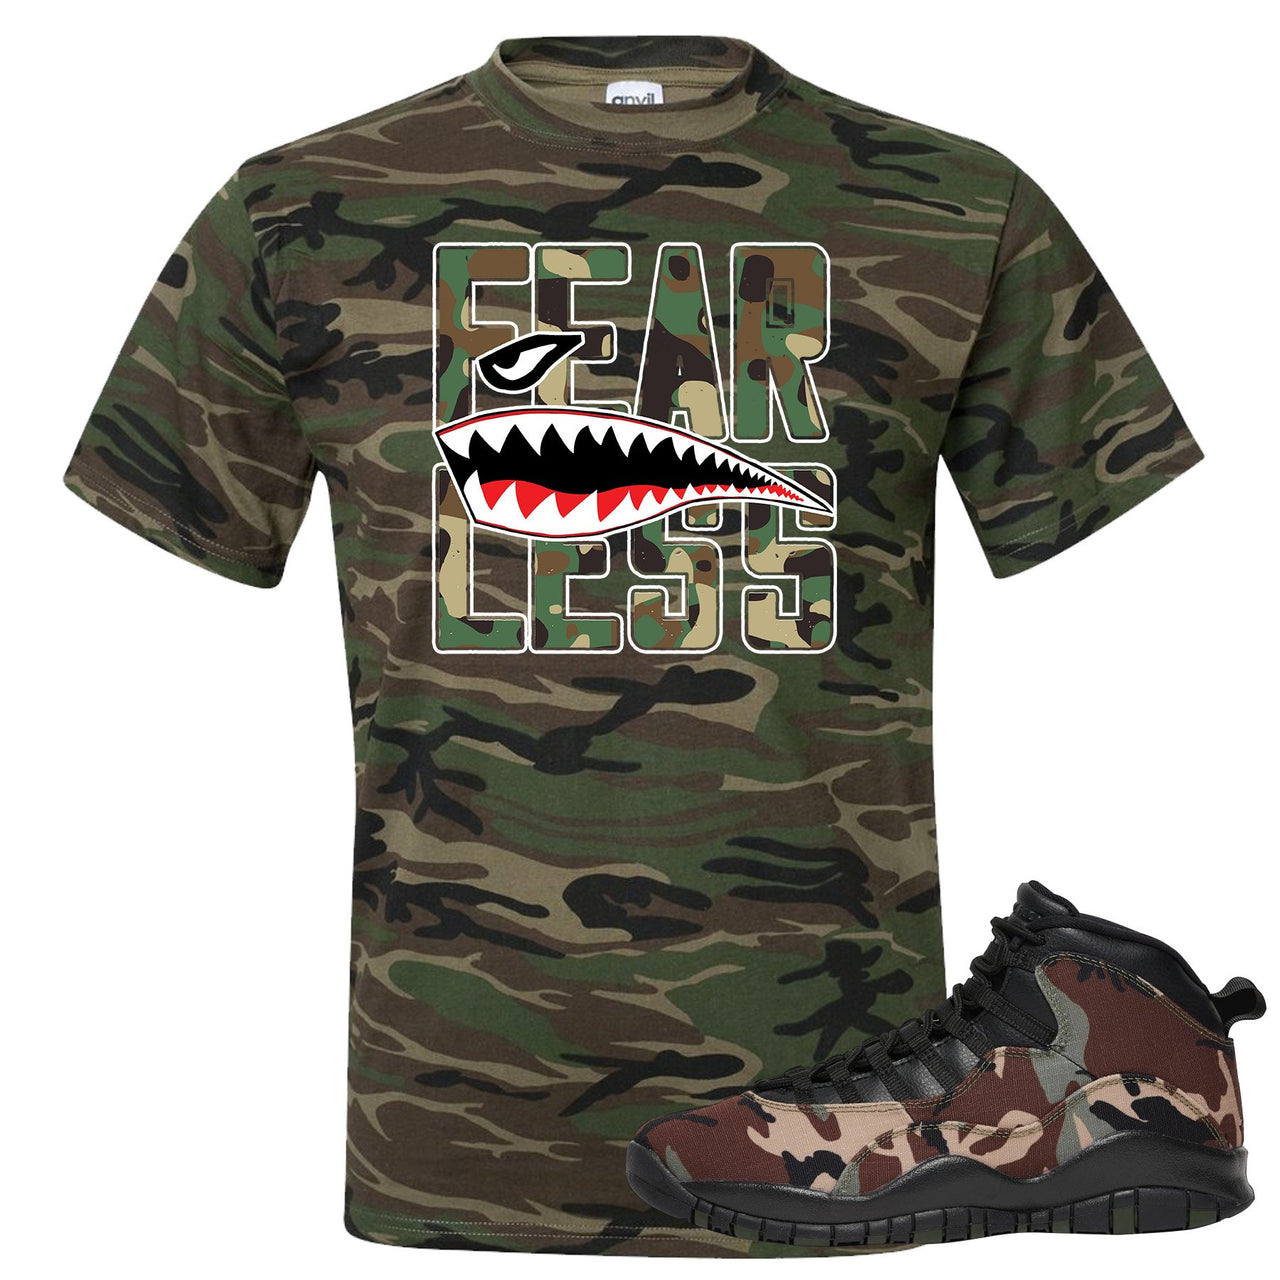 Woodland Camo 10s T Shirt | Fearless, Camouflage